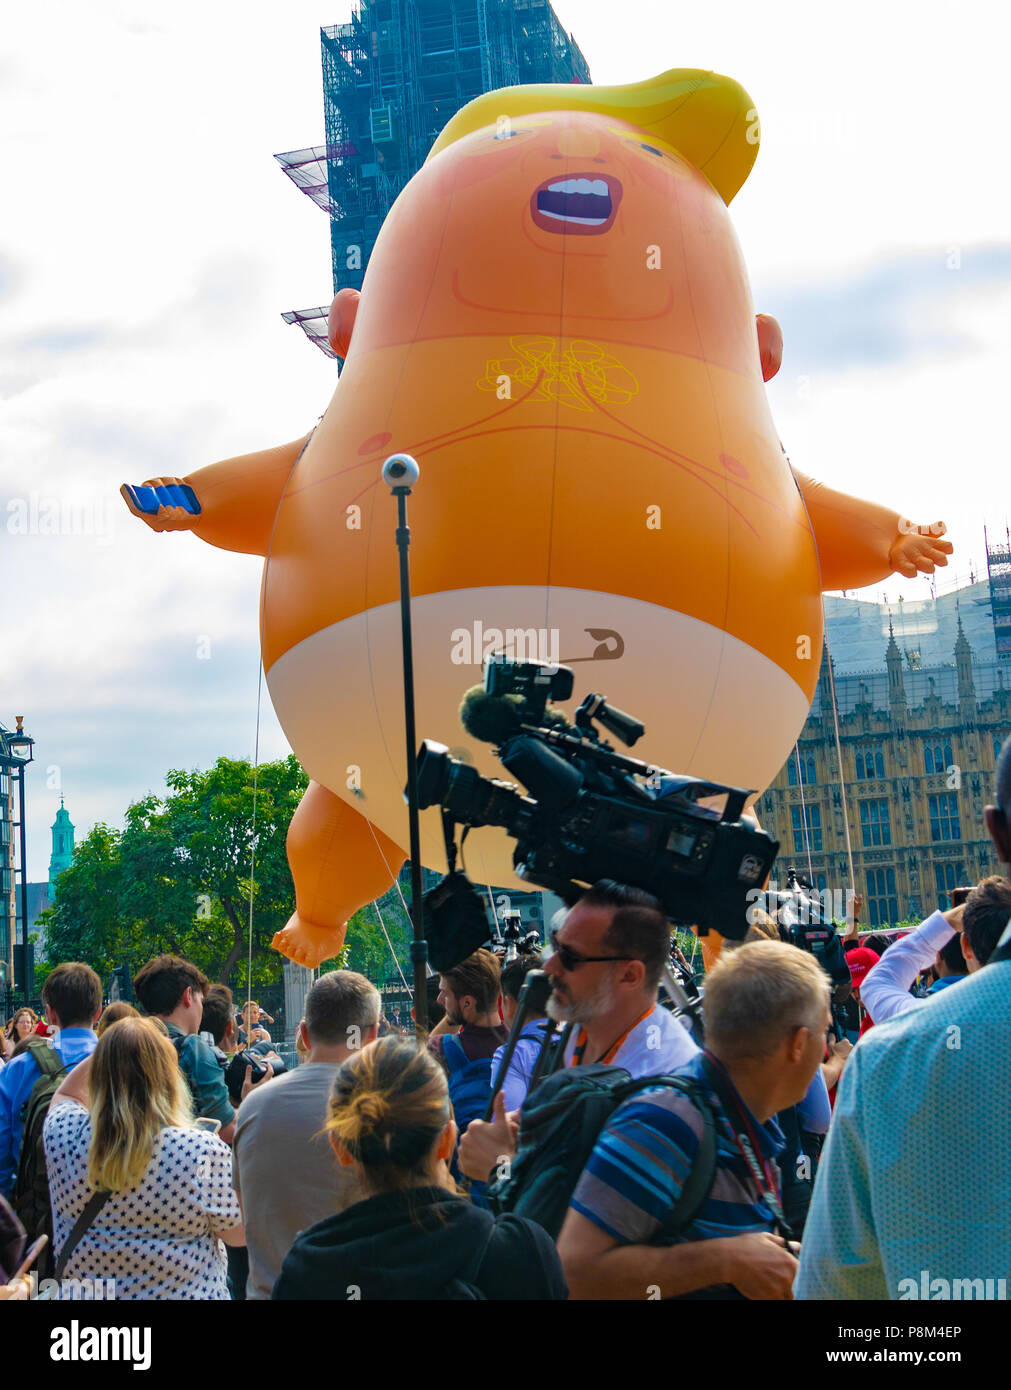 Demonstration during the visit of President Donald Trump to the UK on Friday 13th July 2018 Stock Photo